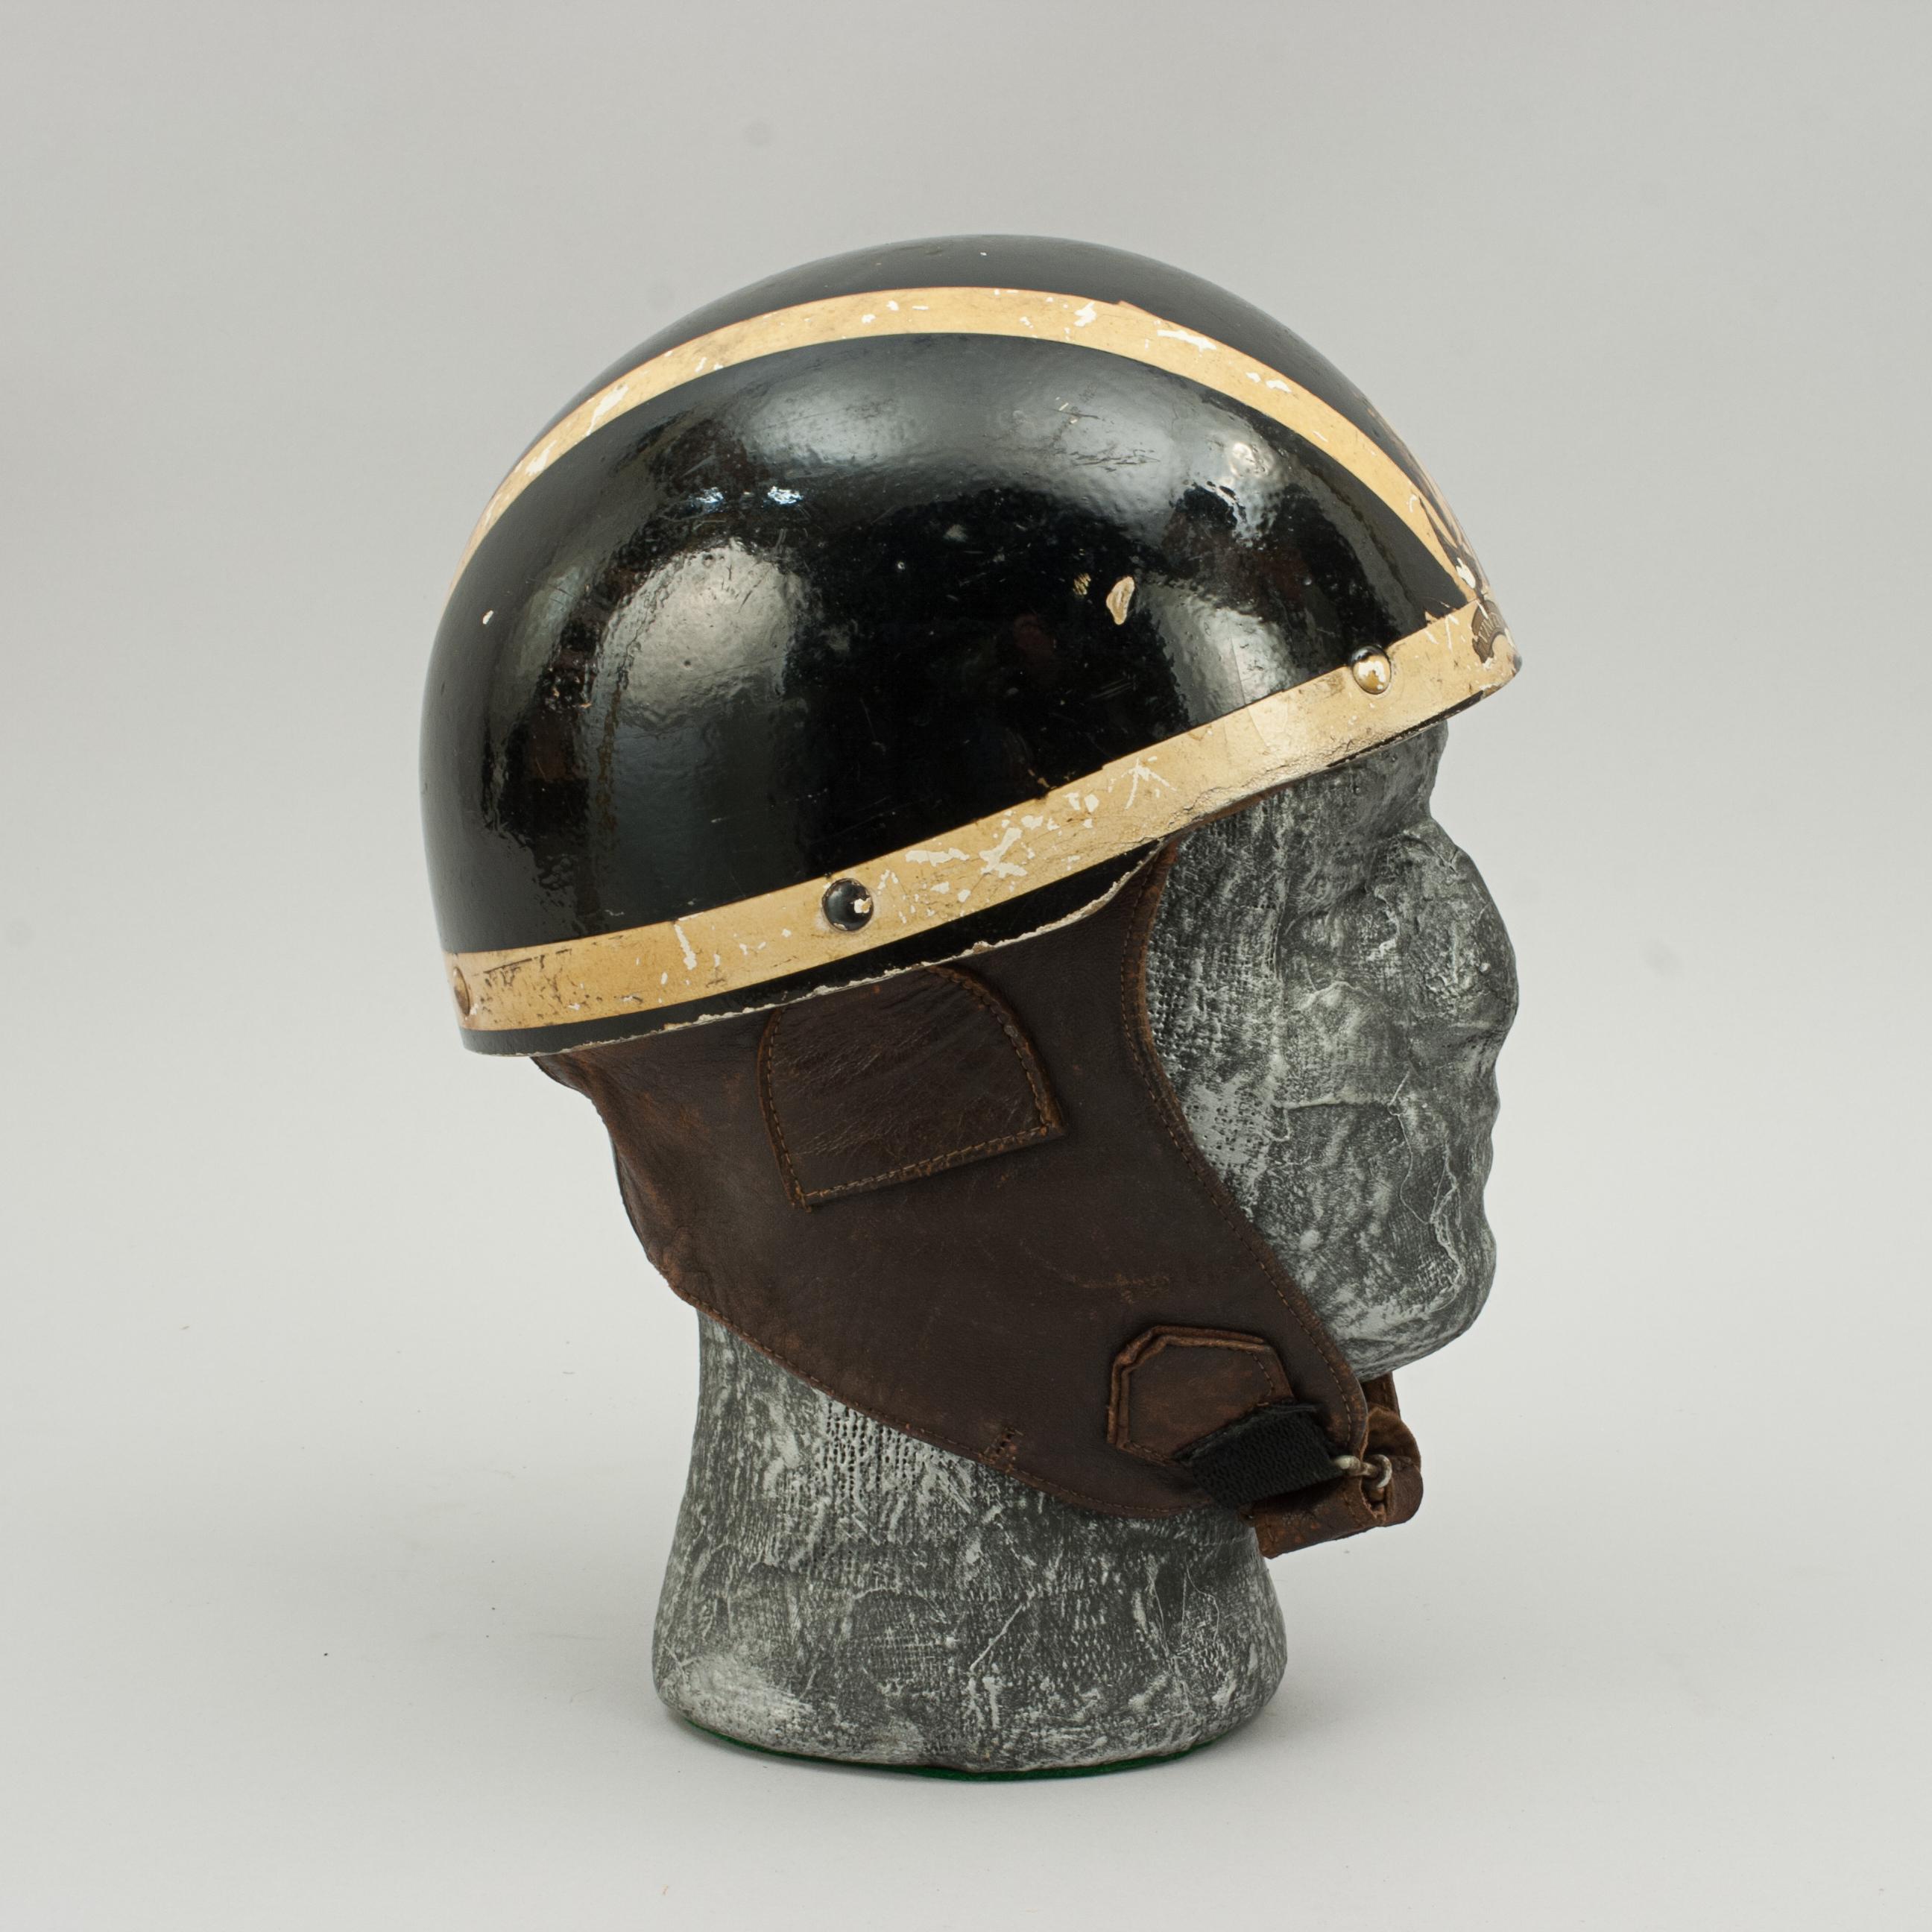 Vintage Cromwell Motorcycle helmet, The 'Noll'.
A black helmet made in England by Cromwell, The 'Noll'. The pudding basin motorcycle helmet is fitted with a material headband and straps keeping a space between the head and outer case of the helmet.